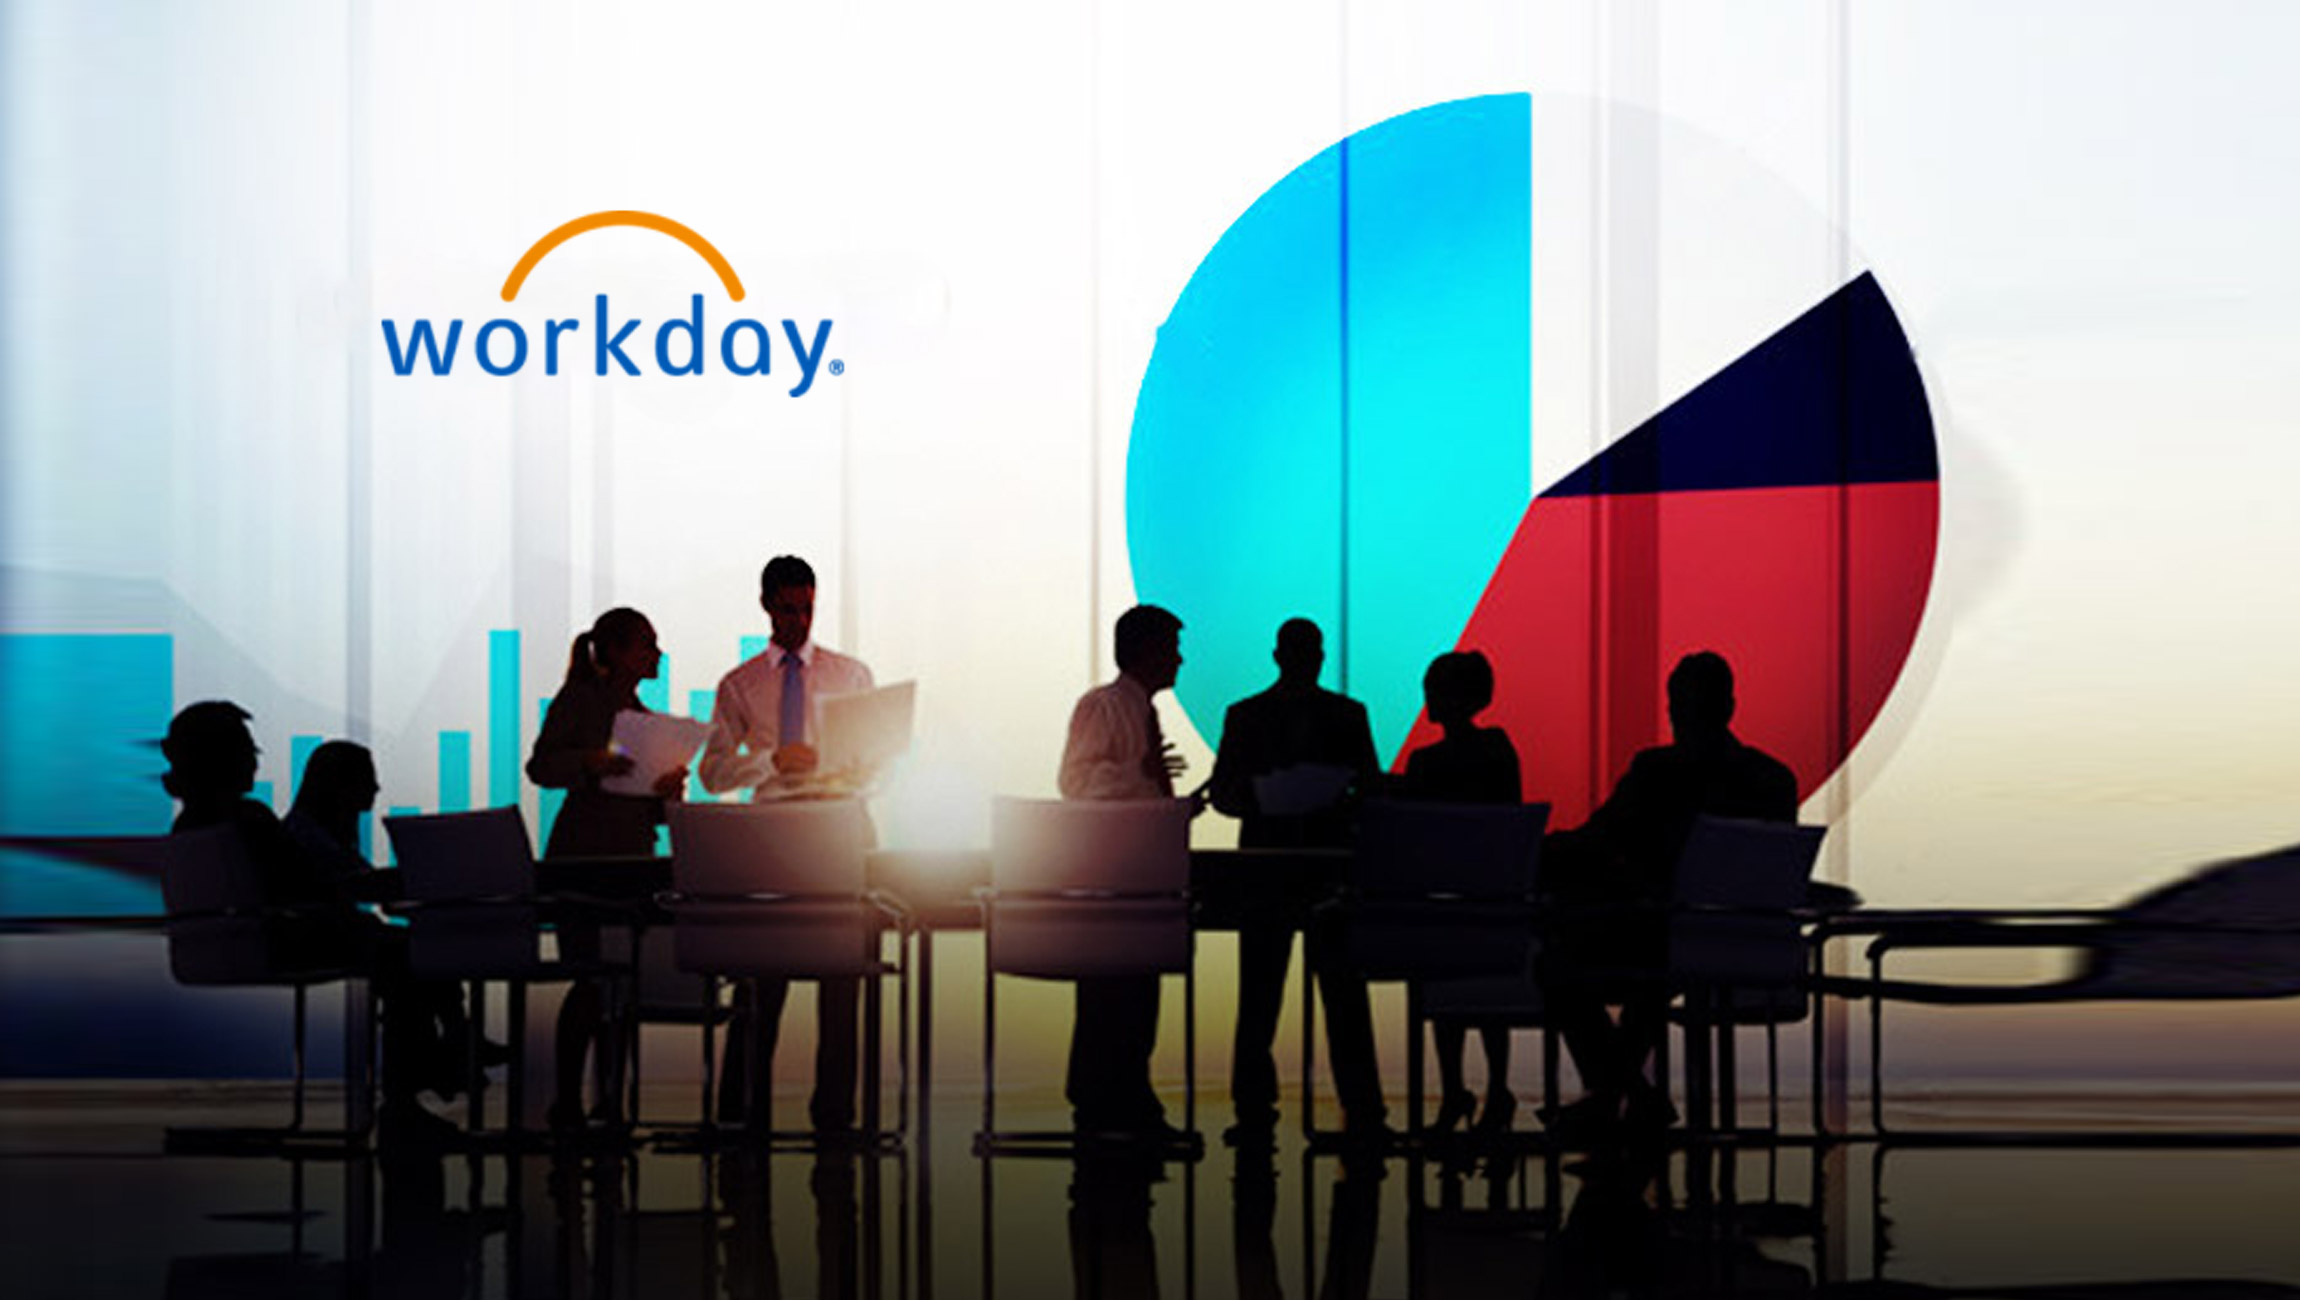 Workday Launches New Industry Program to Accelerate Customer Cloud Transformations with Expansive Partner Ecosystem